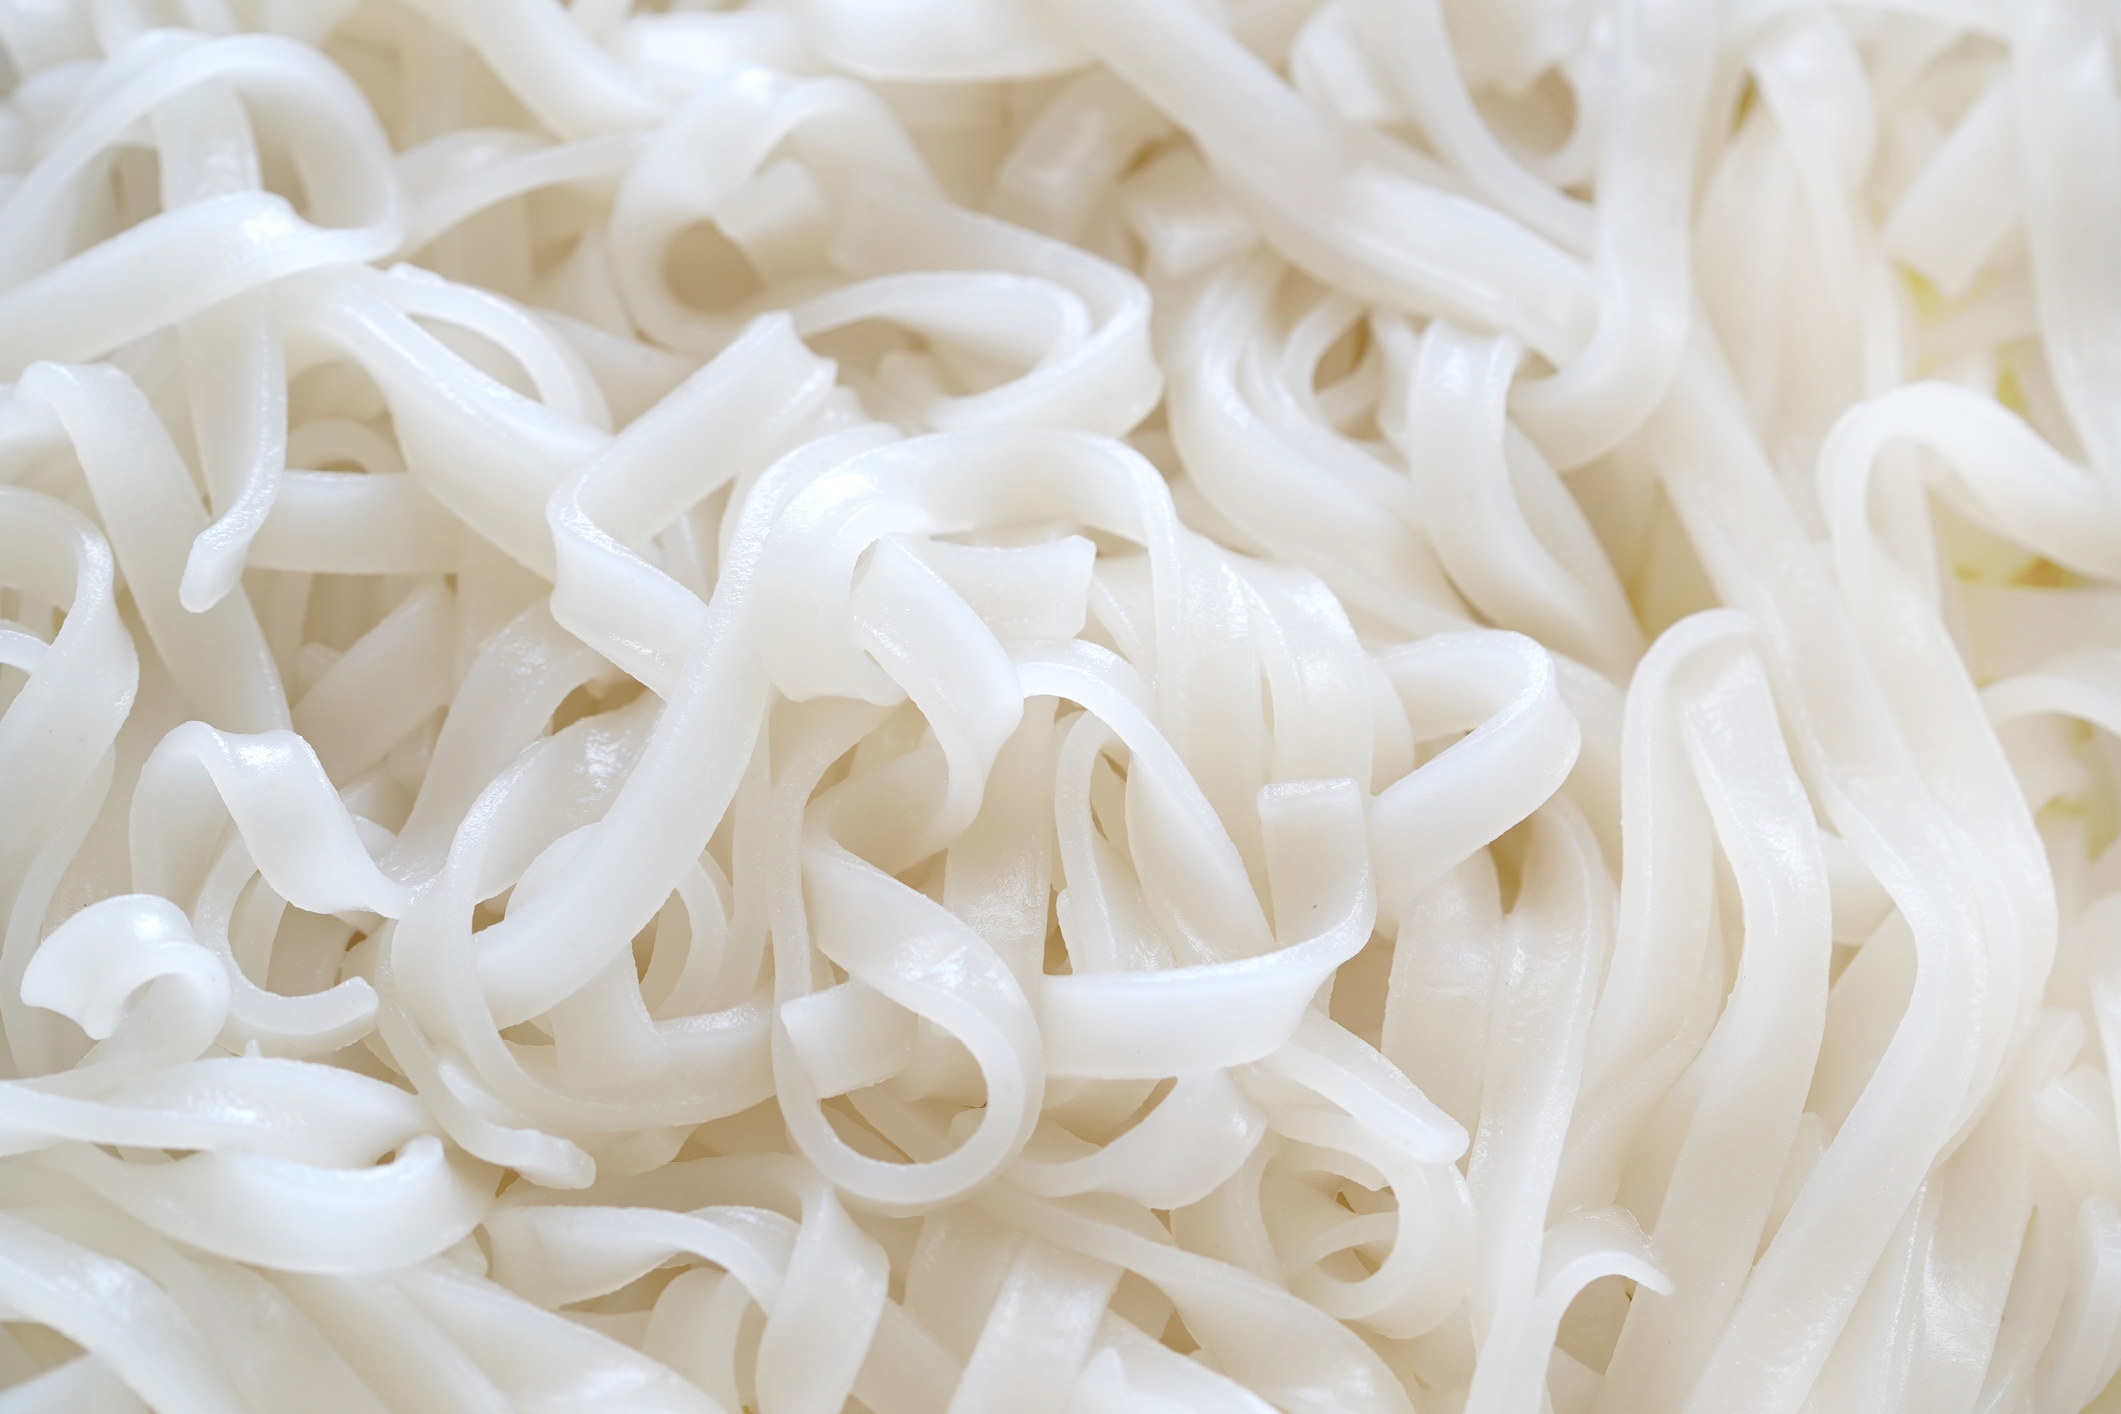 Cooked rice noodles